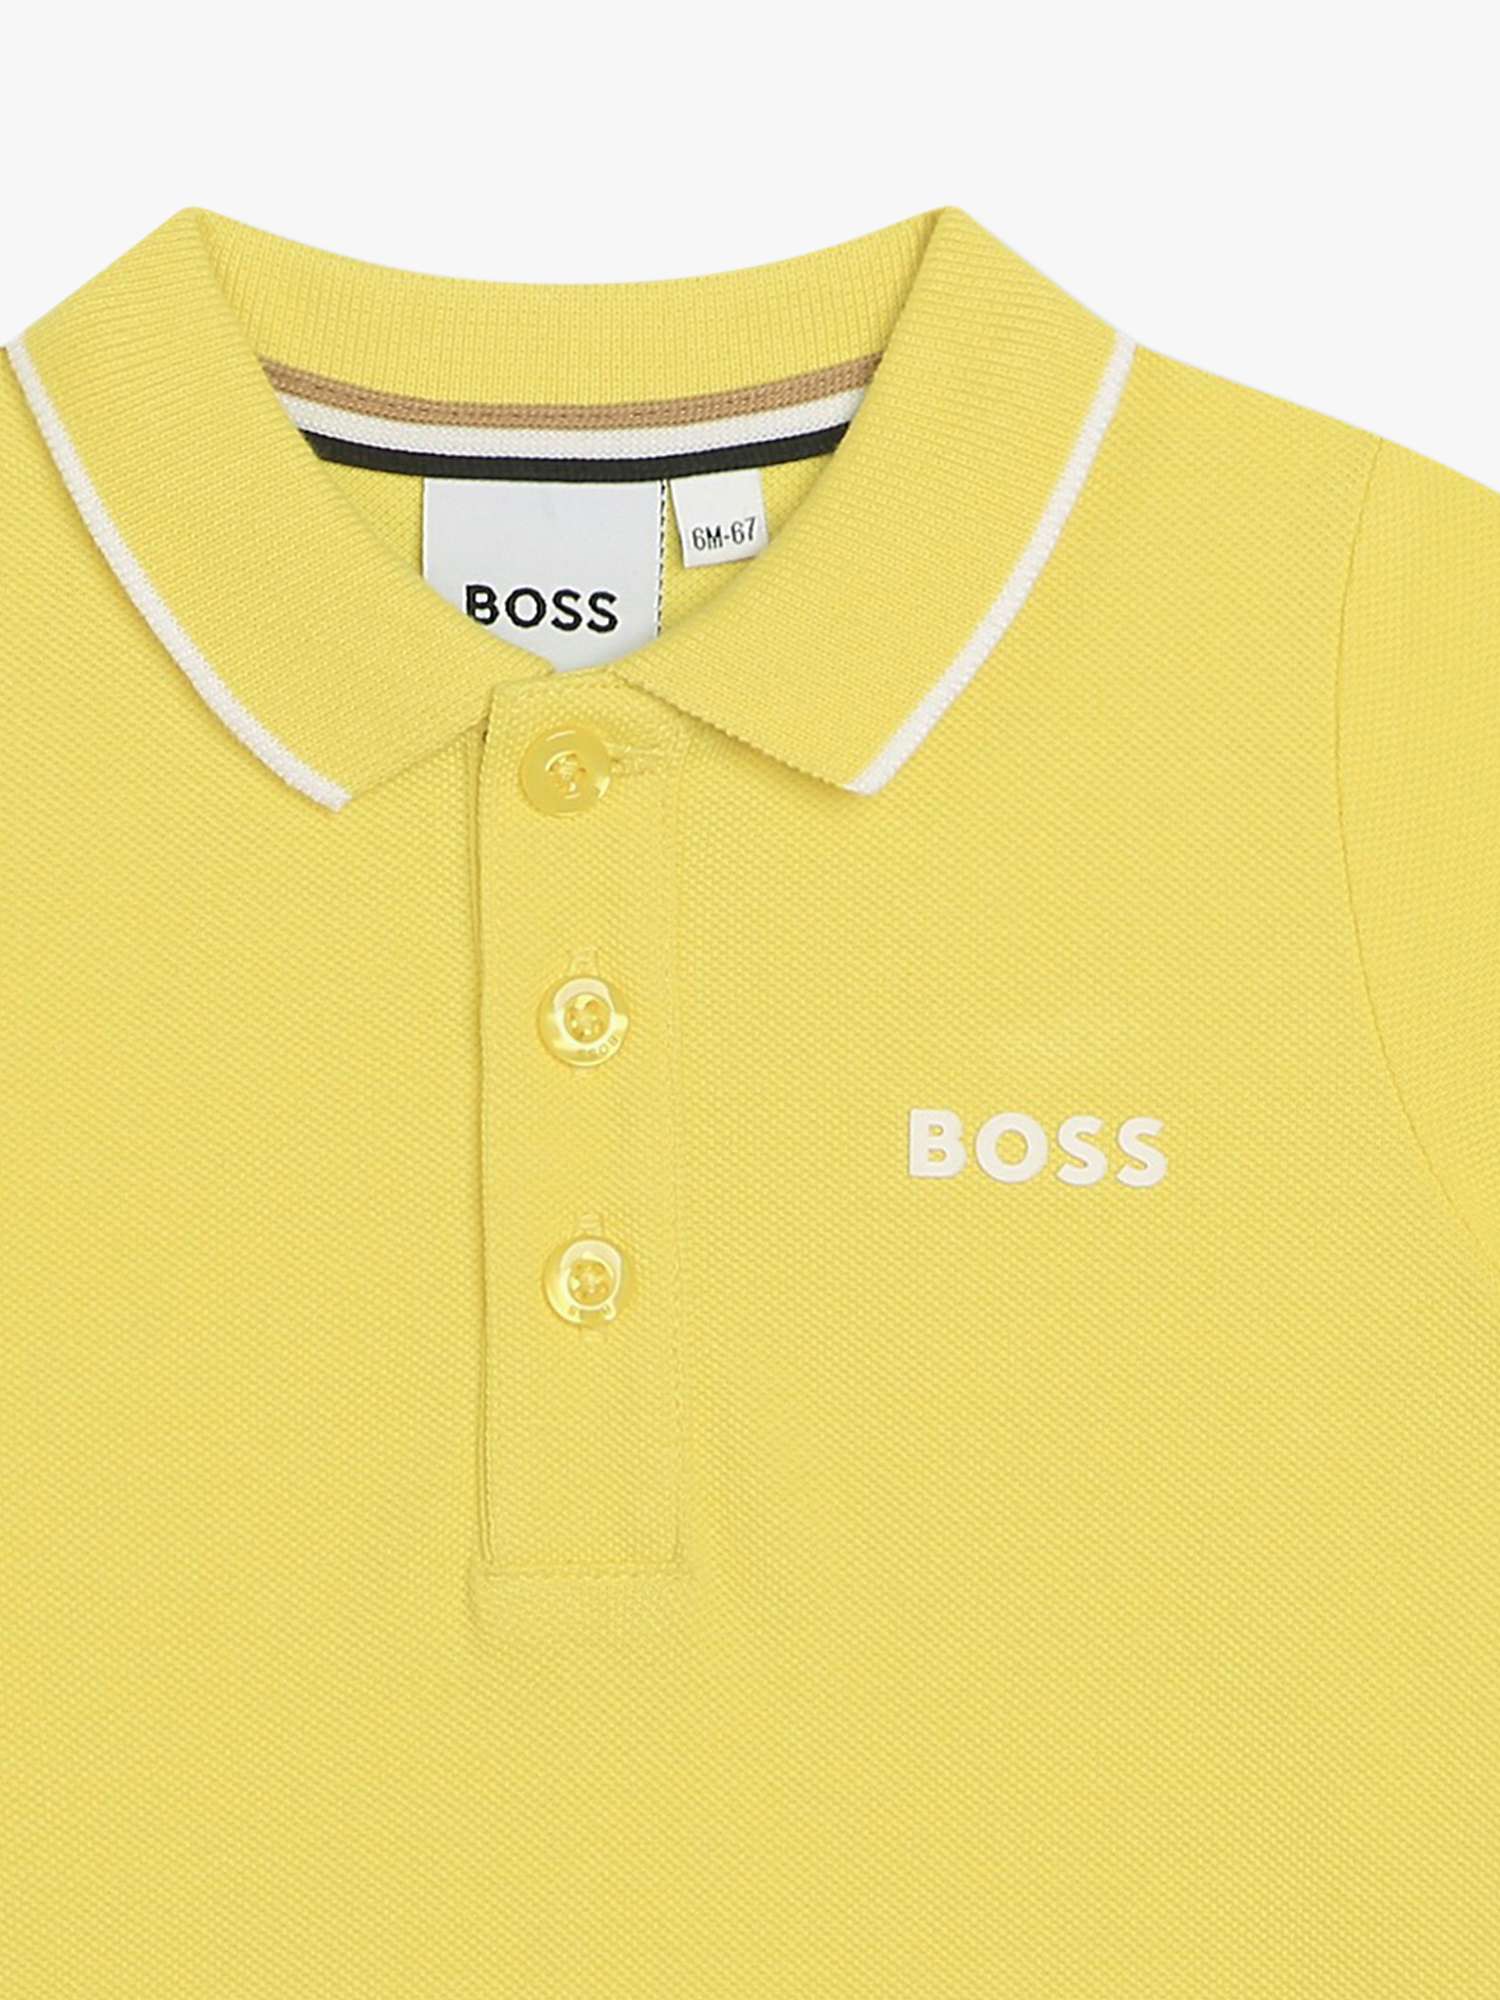 Buy BOSS Baby Short Sleeve Polo Shirt, Yellow Online at johnlewis.com